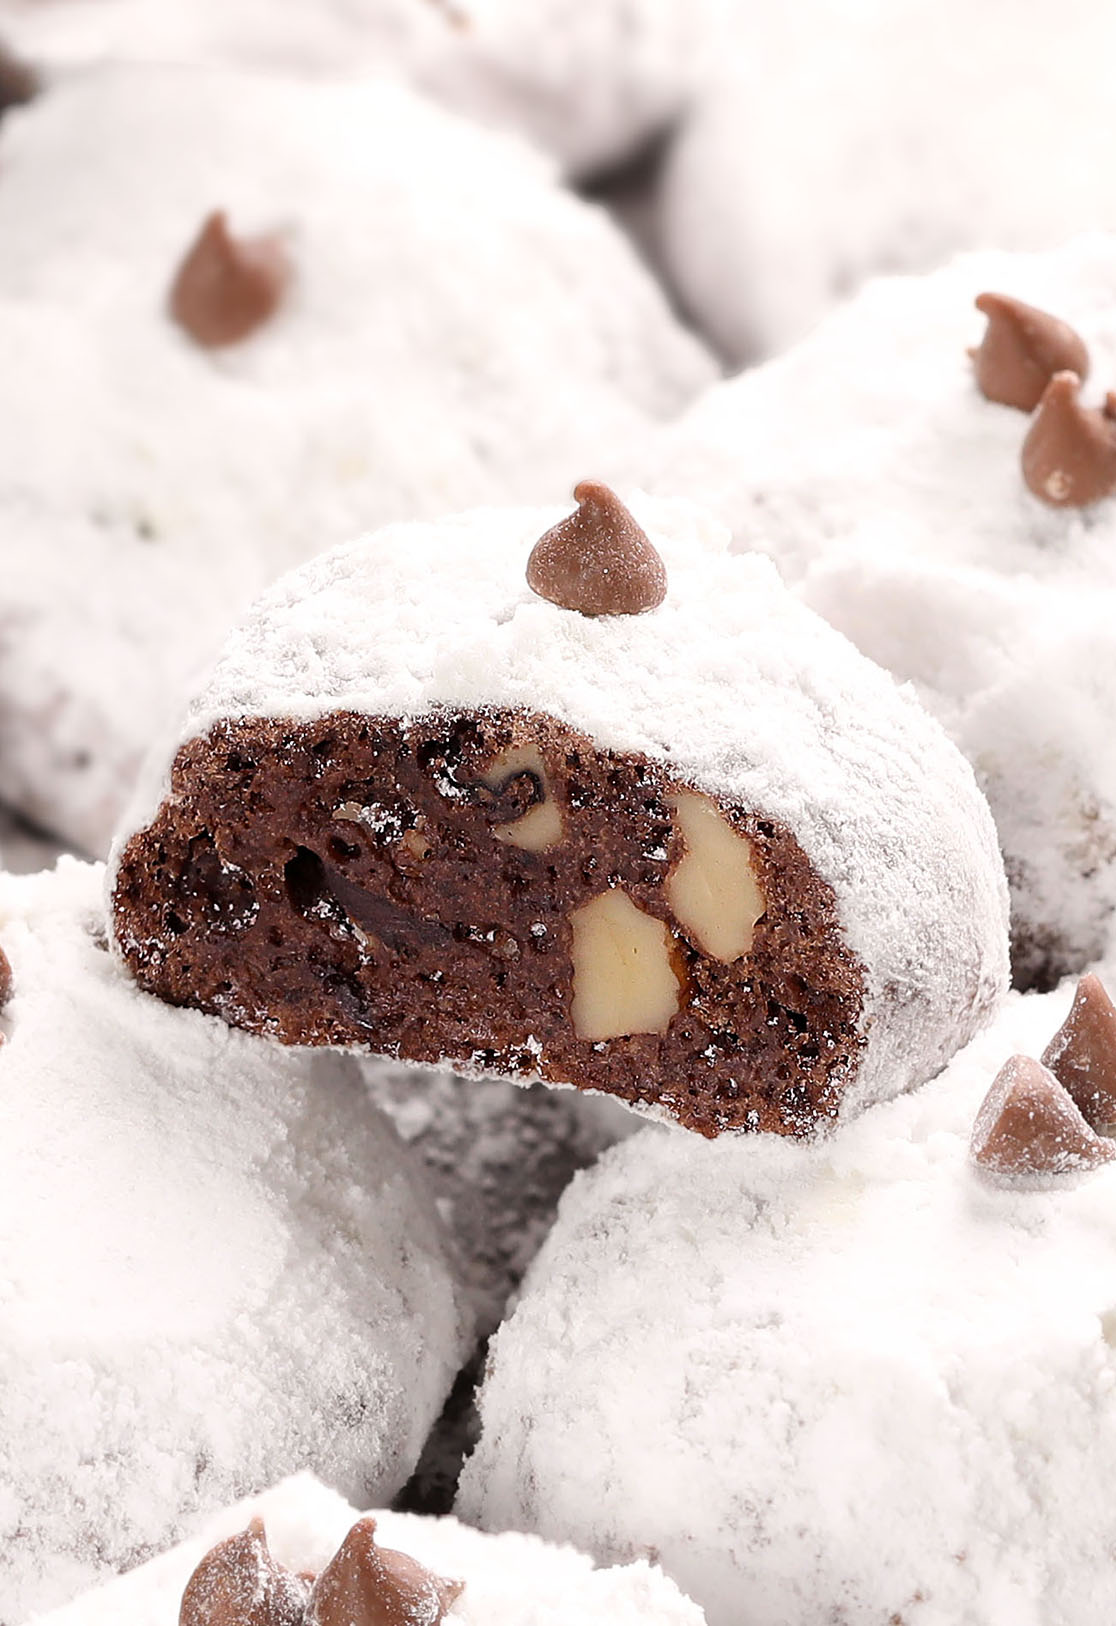 For all Christmas Chocolate lovers, these rich, melt-in-your-mouth Double Chocolate Snowball Cookies are absolutely the recipe to try!